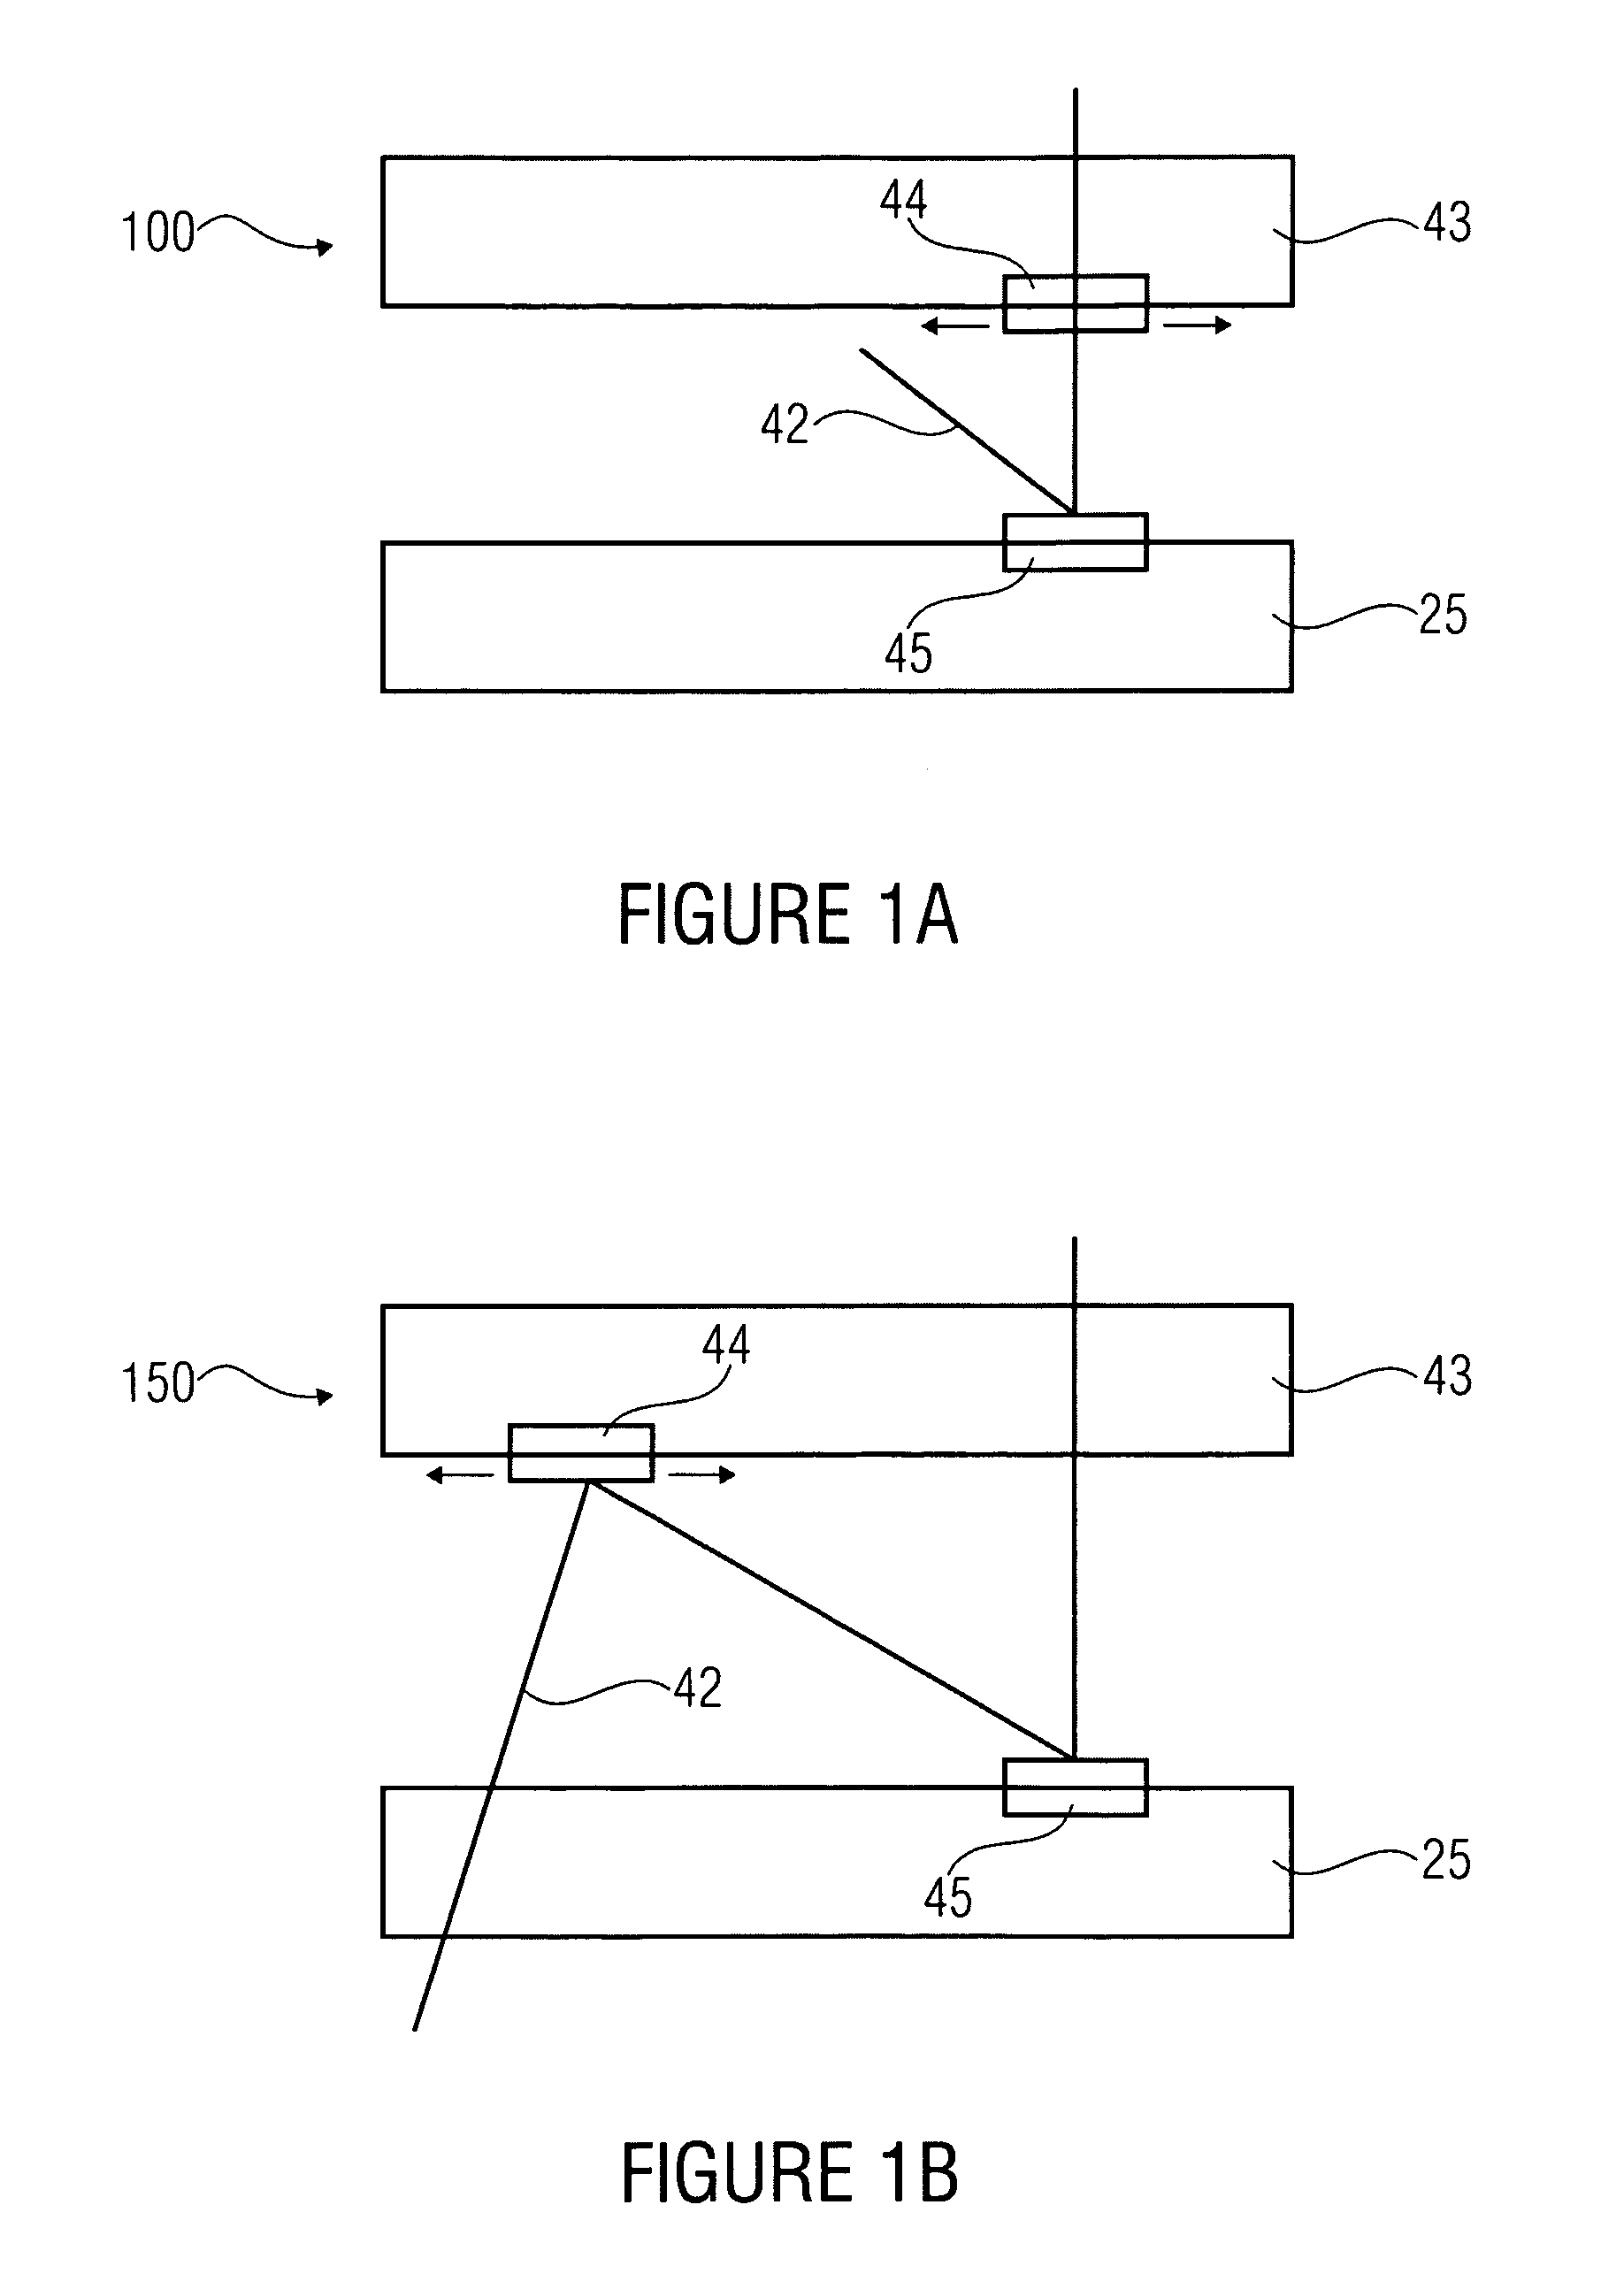 Optical apparatus of a stacked design, and method of producing same